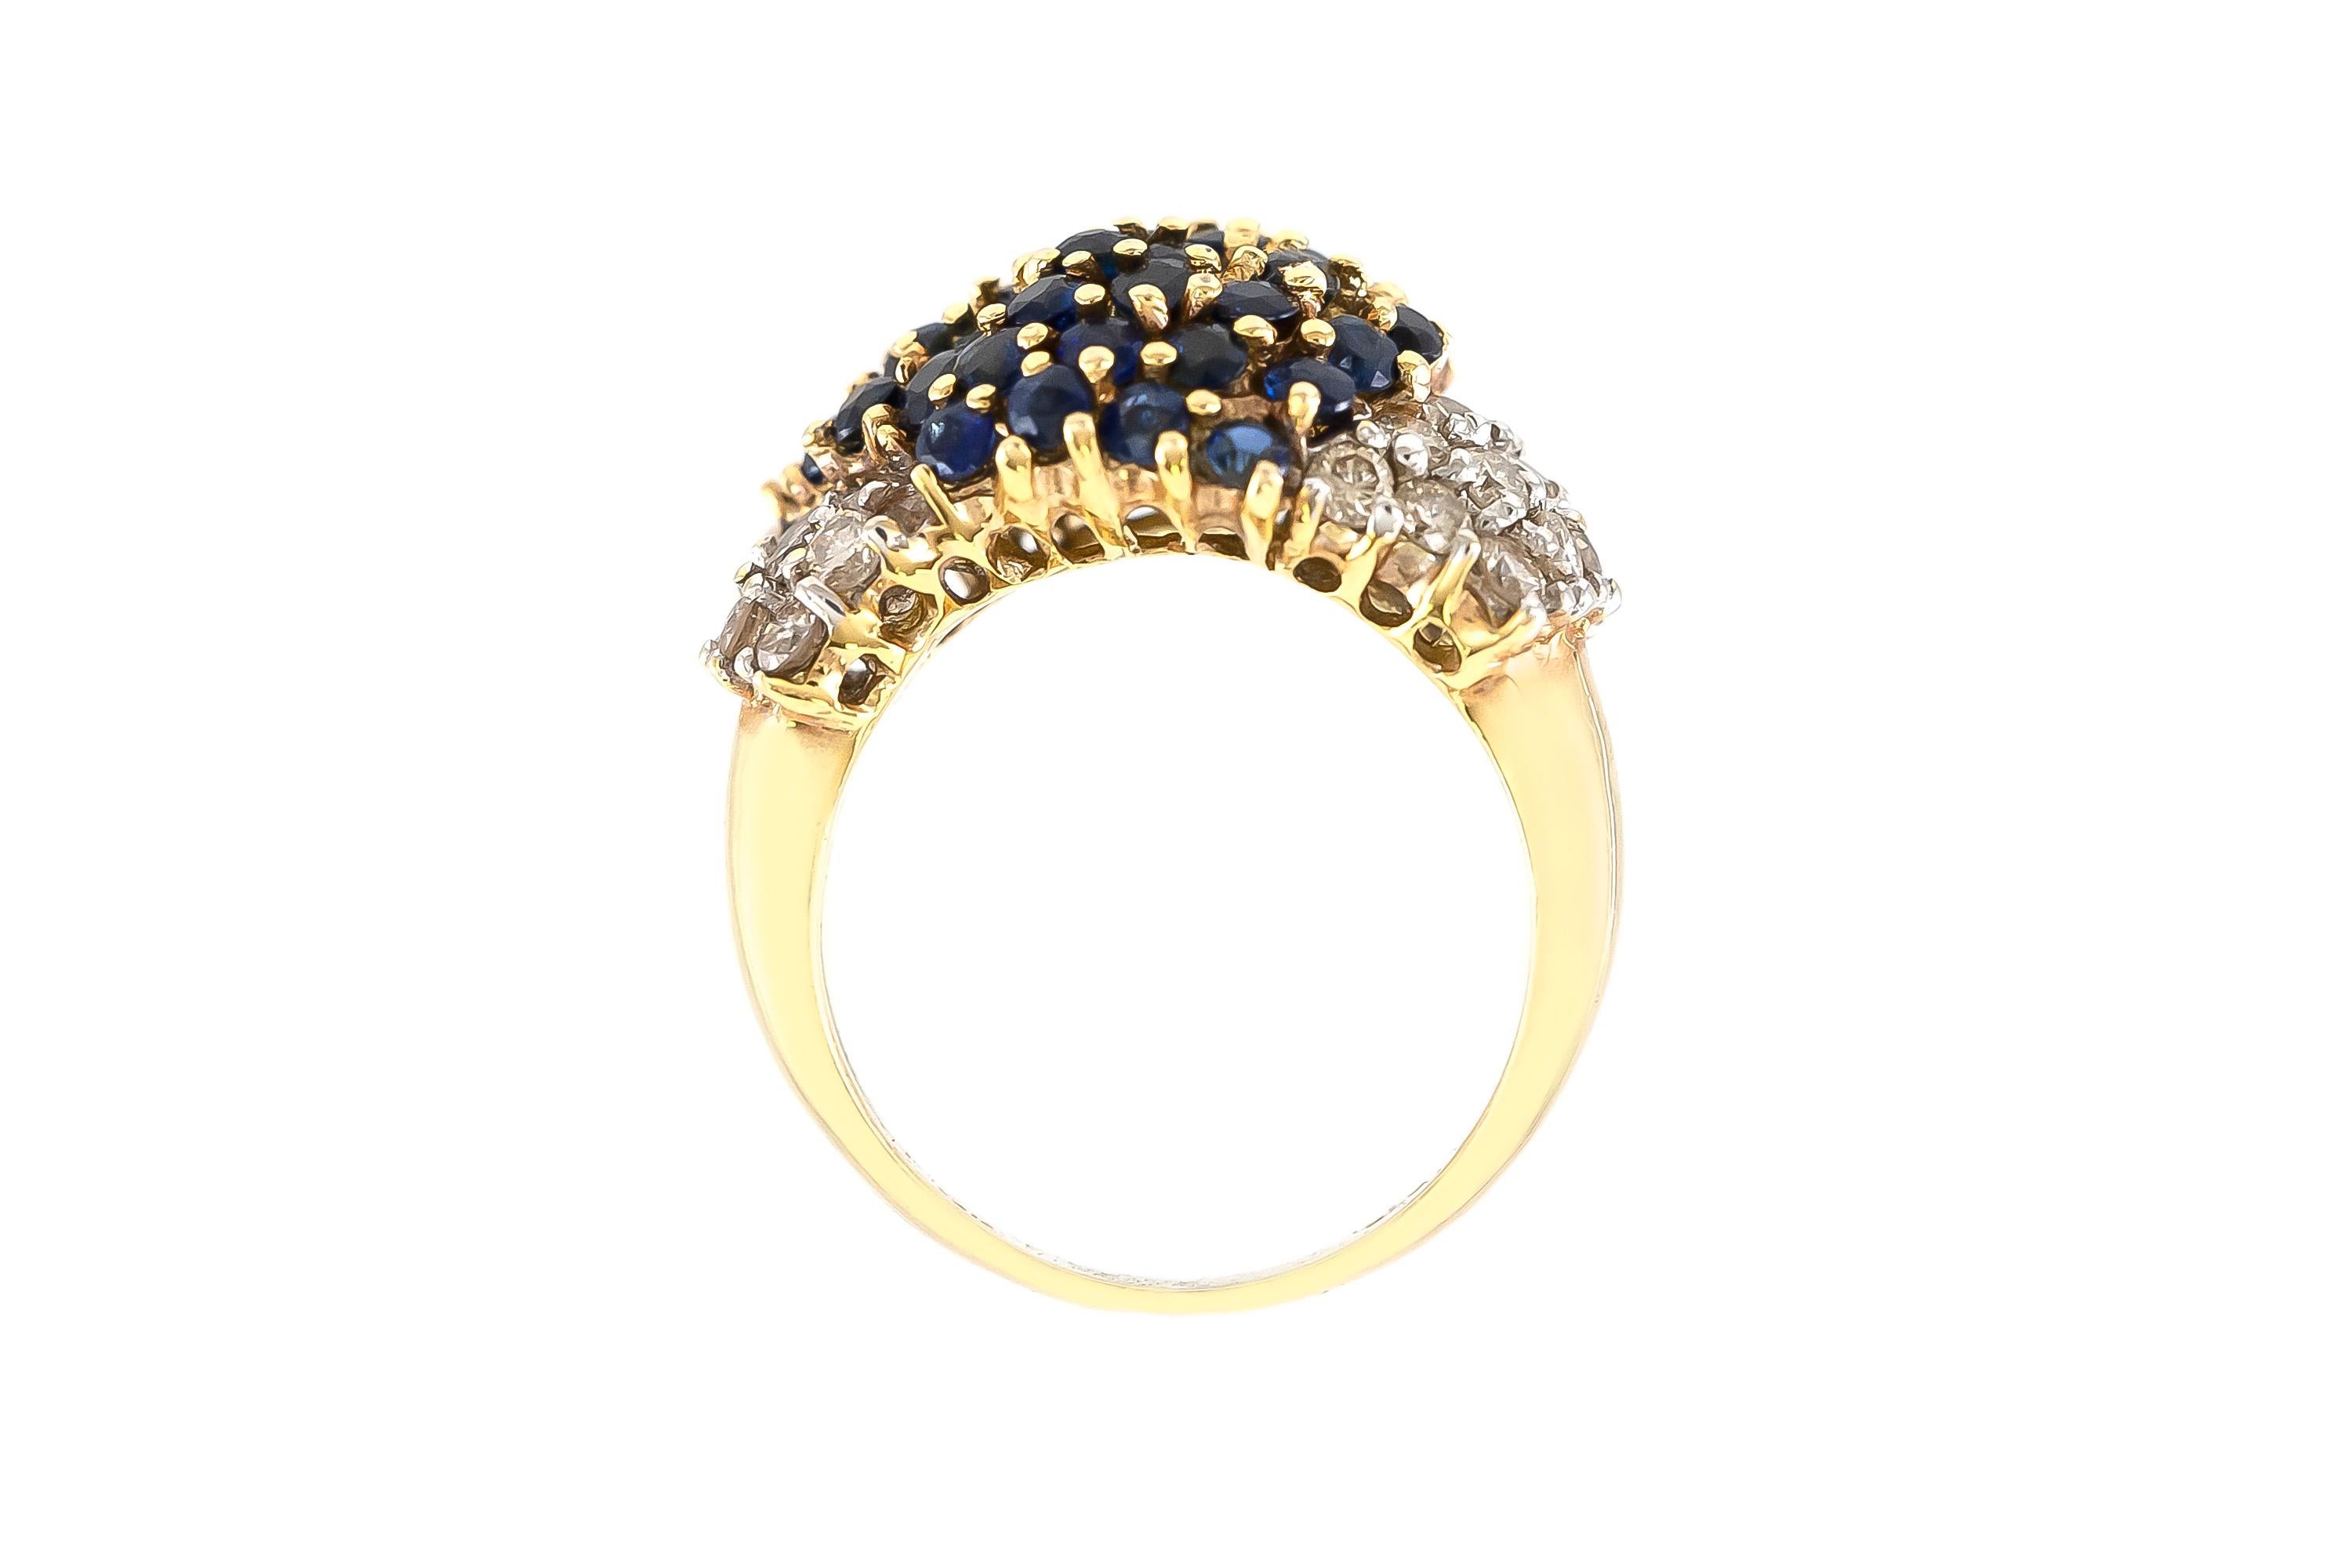 The ring is finely crafted in 14k yellow gold with diamonds weighing approximately total of 1.25 carat and sapphires weighing approximately total of 2.50 carat.
Circa 1950